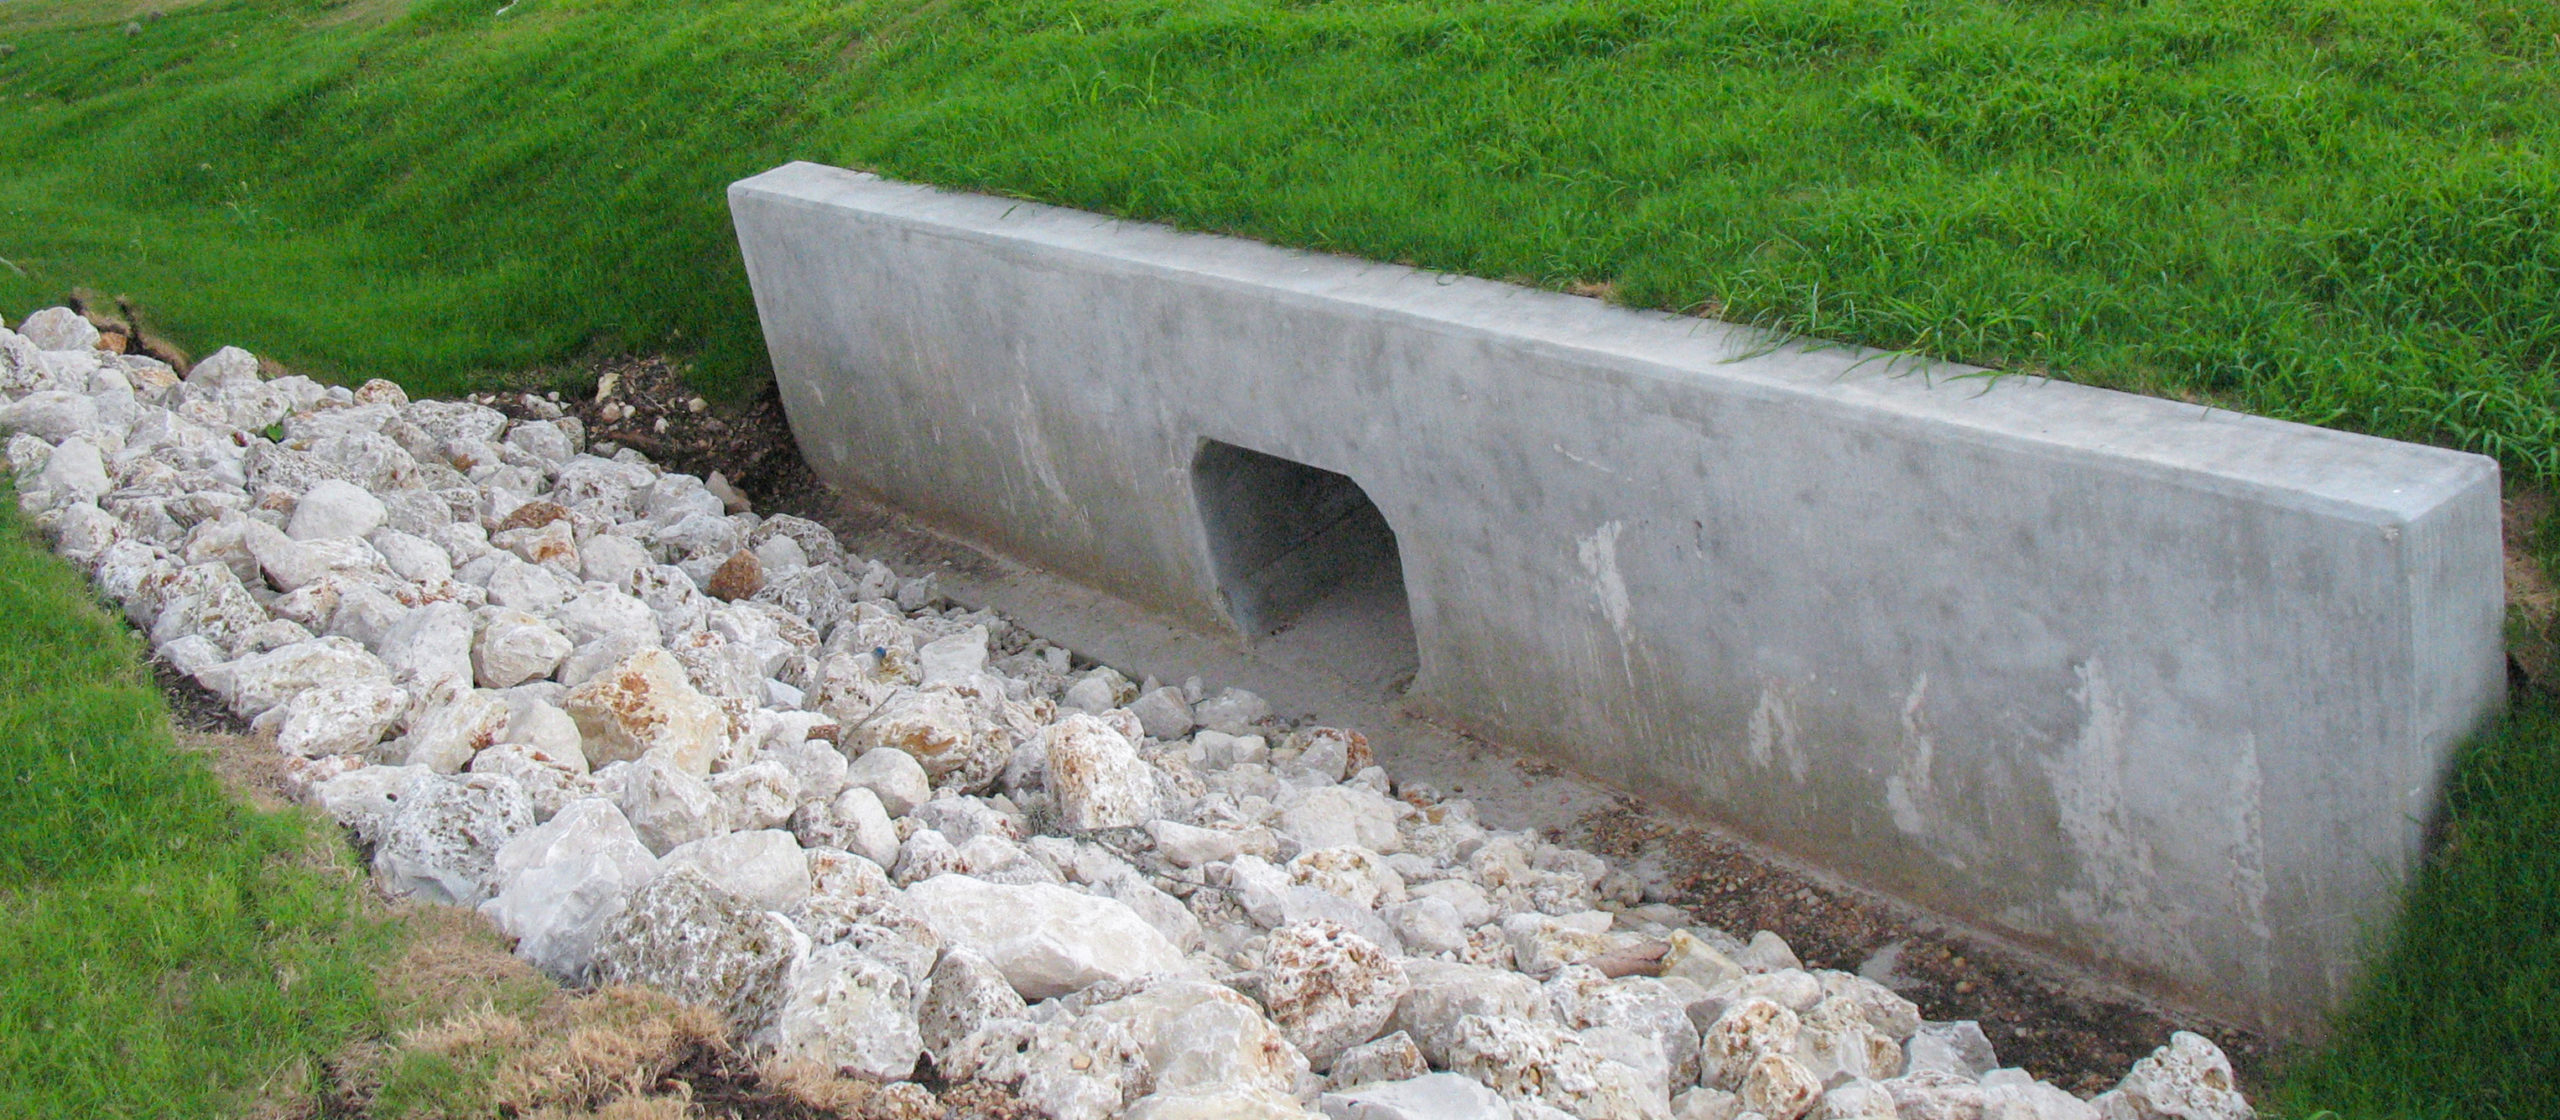 Drainage structure